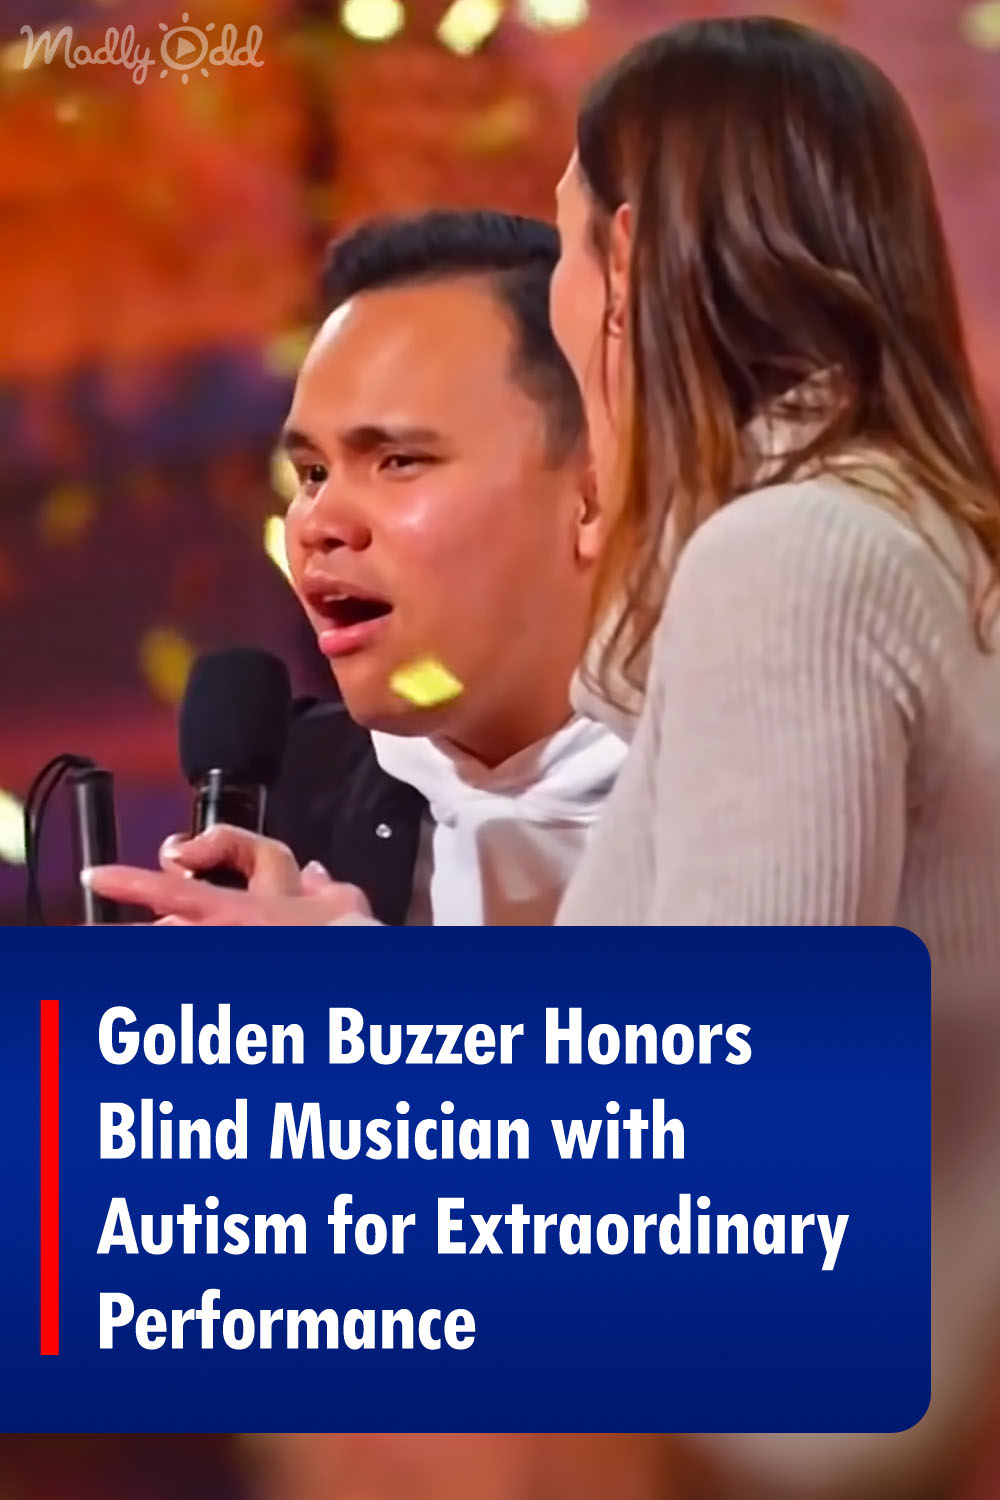 Golden Buzzer Honors Blind Musician with Autism for Extraordinary Performance